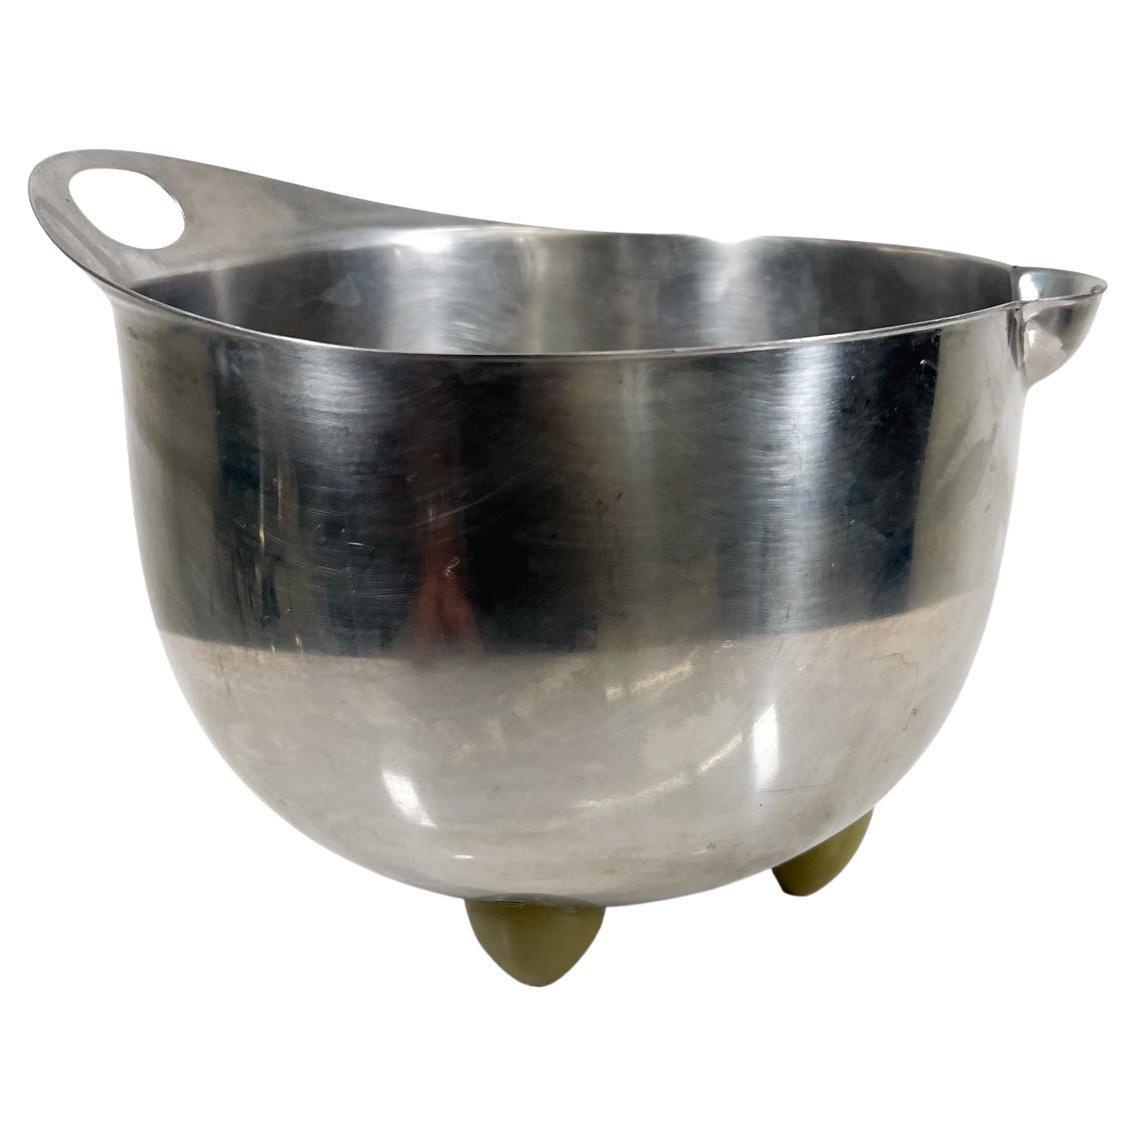 1985 Michael Graves Design Stainless Steel Footed Mixing Bowl For Sale